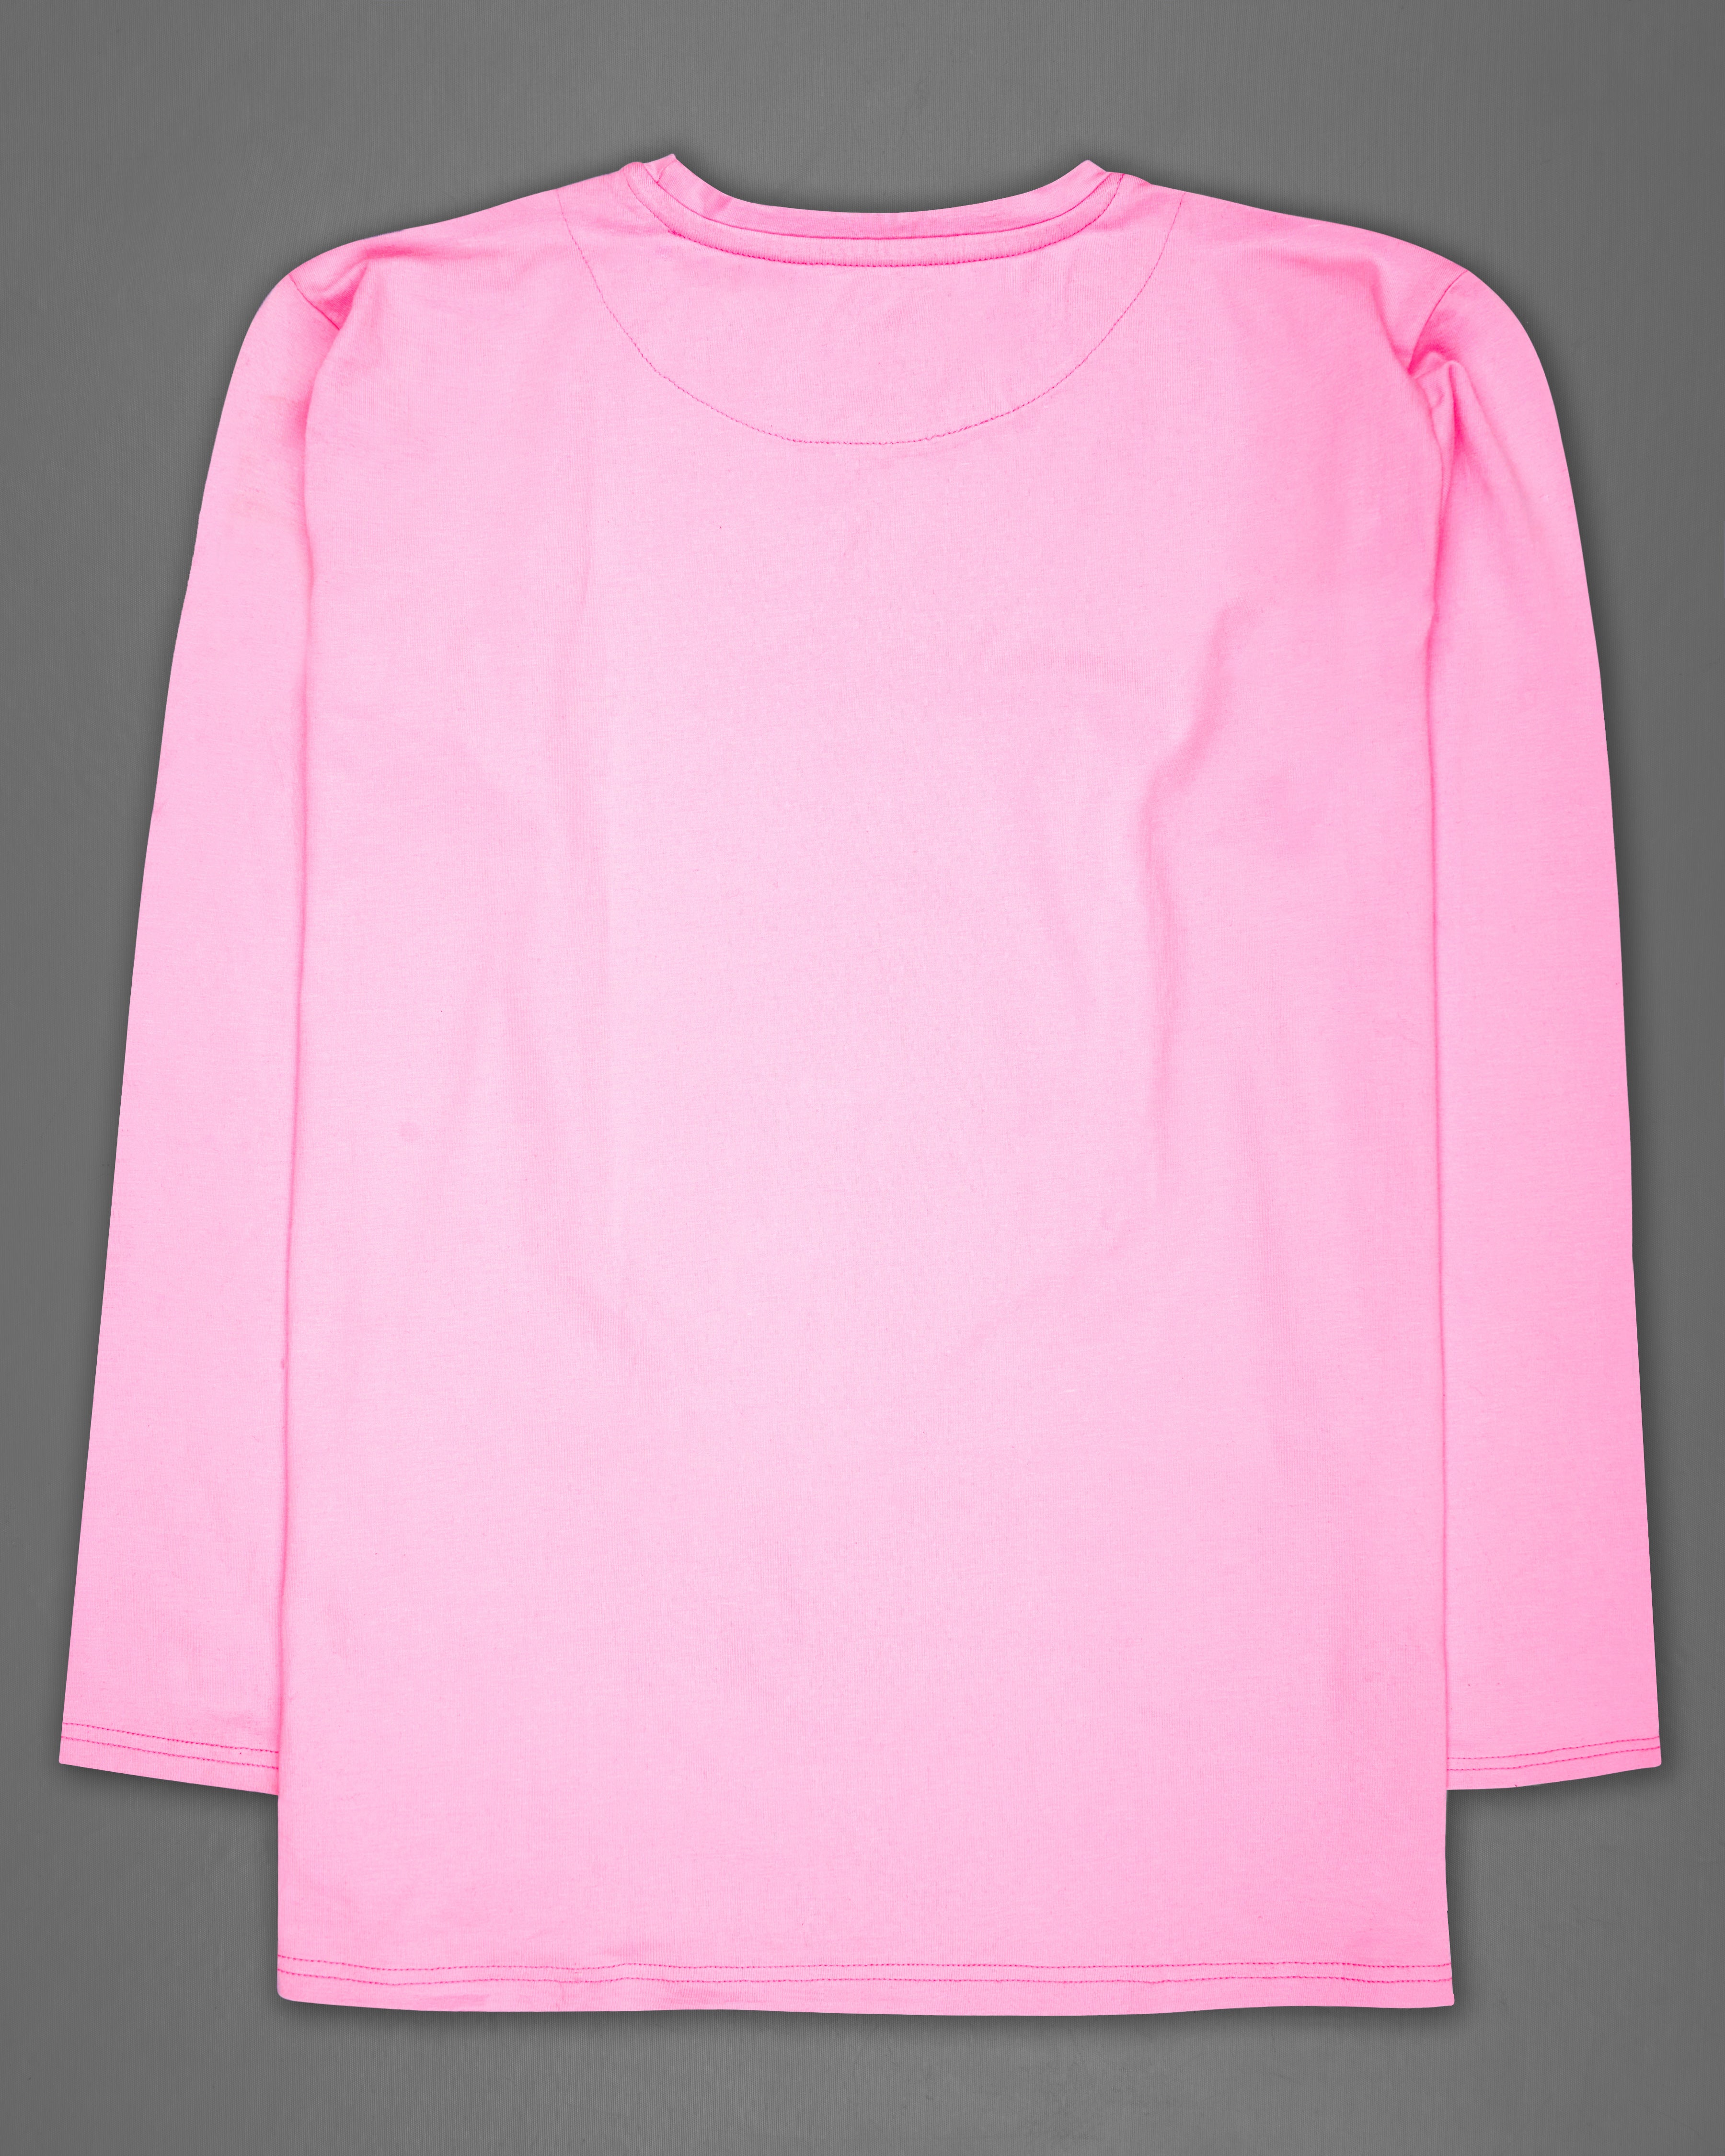 Oyster Pink Rubber Printed Premium Cotton T-Shirt TS296-W01-S, TS296-W01-M, TS296-W01-L, TS296-W01-XL, TS296-W01-XXL